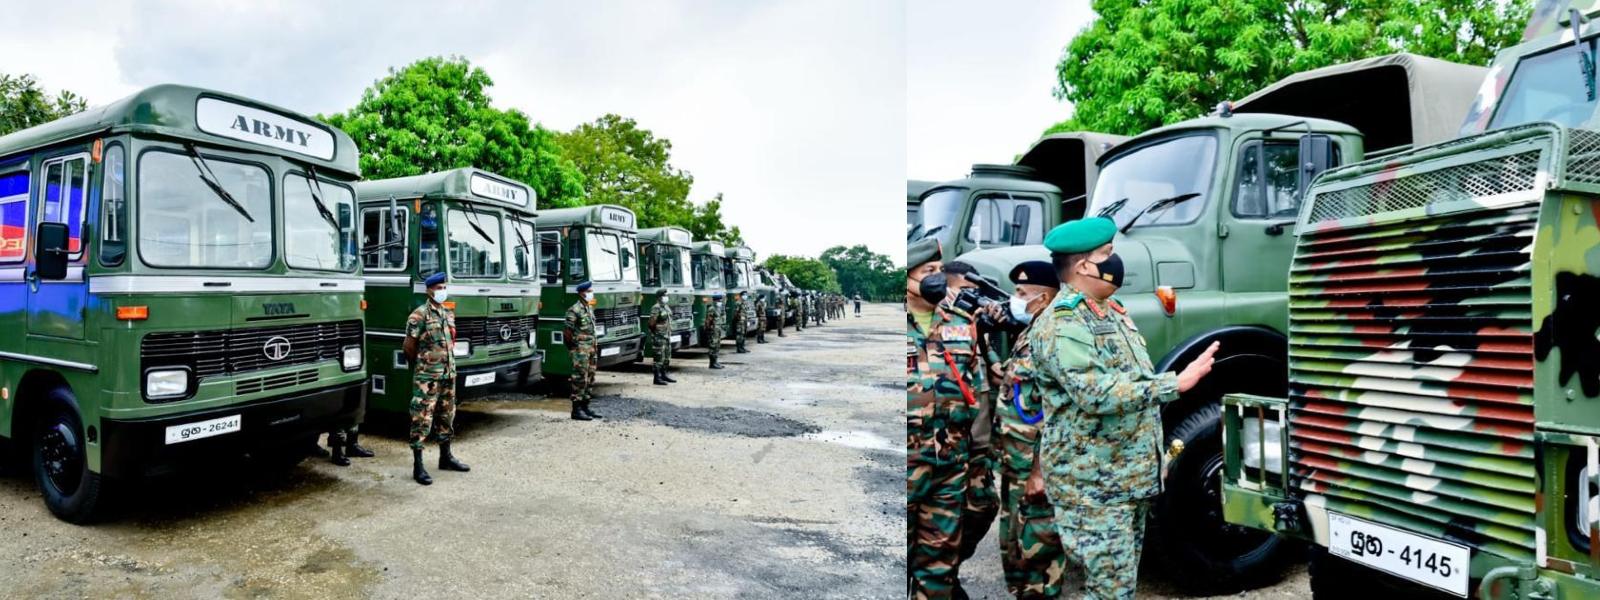 25 Abandoned Vehicles in Jaffna refurbished by Army